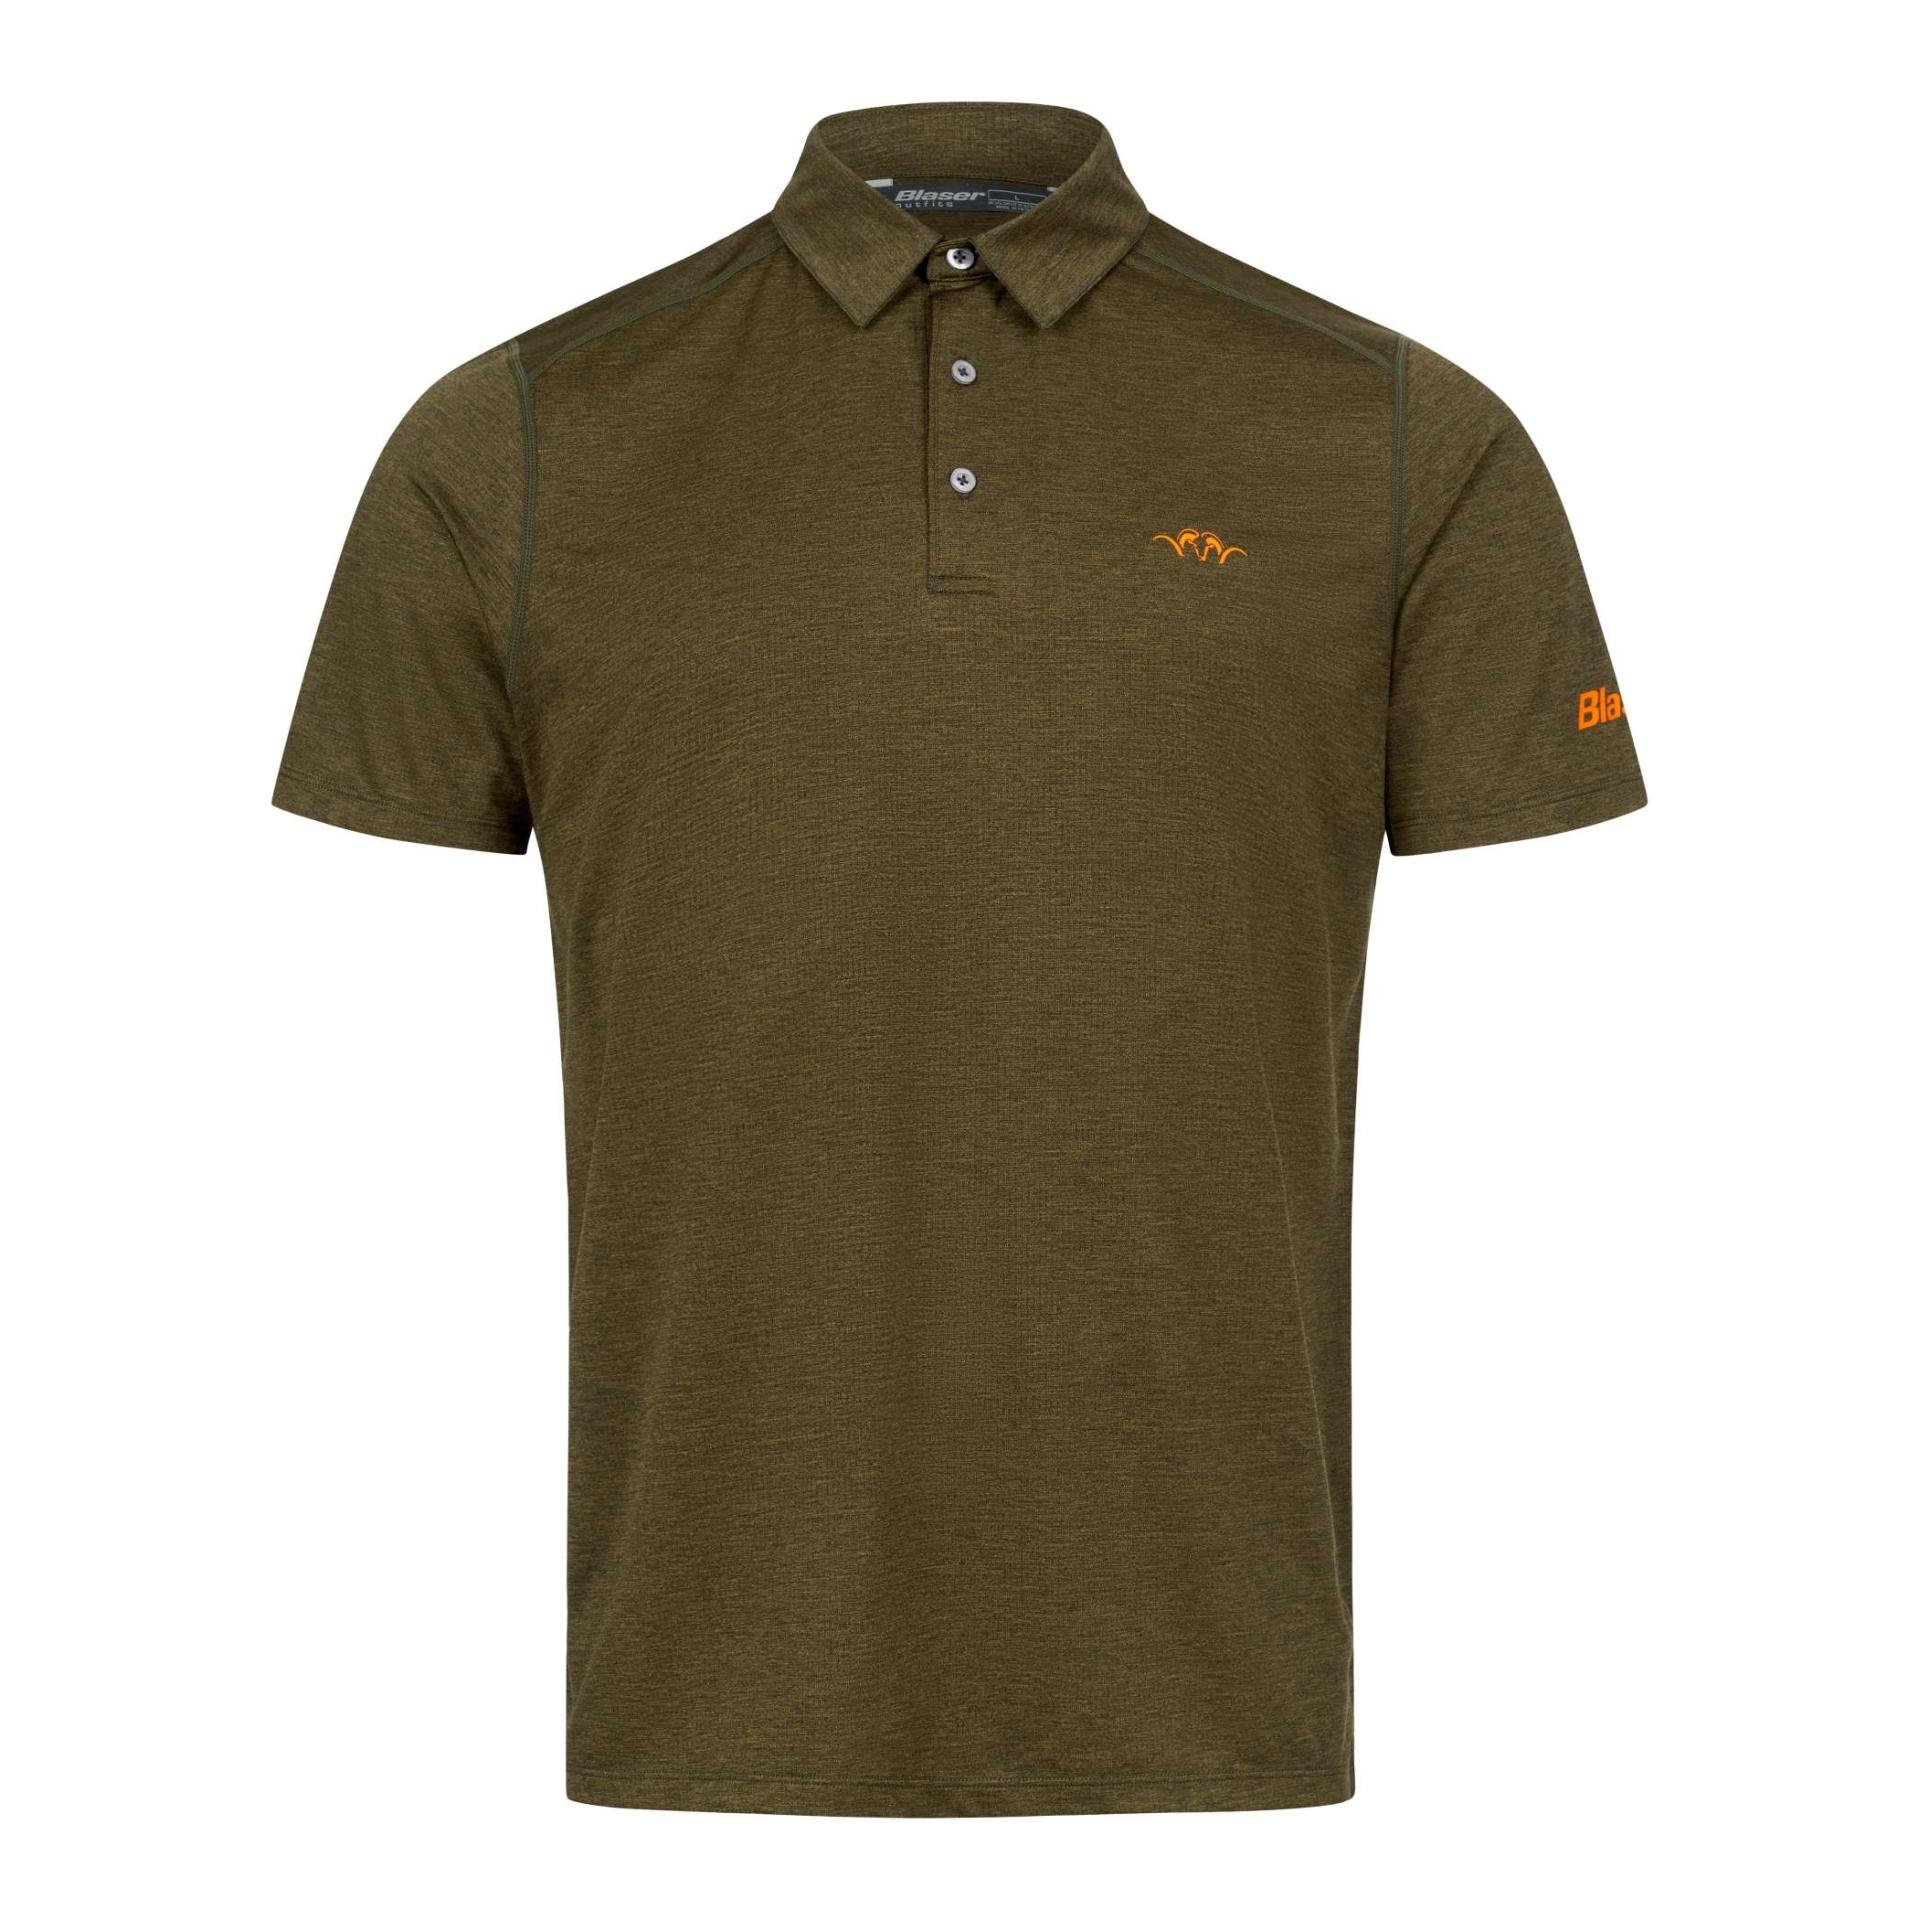 Blaser Men’s Competition Polo Shirt 23